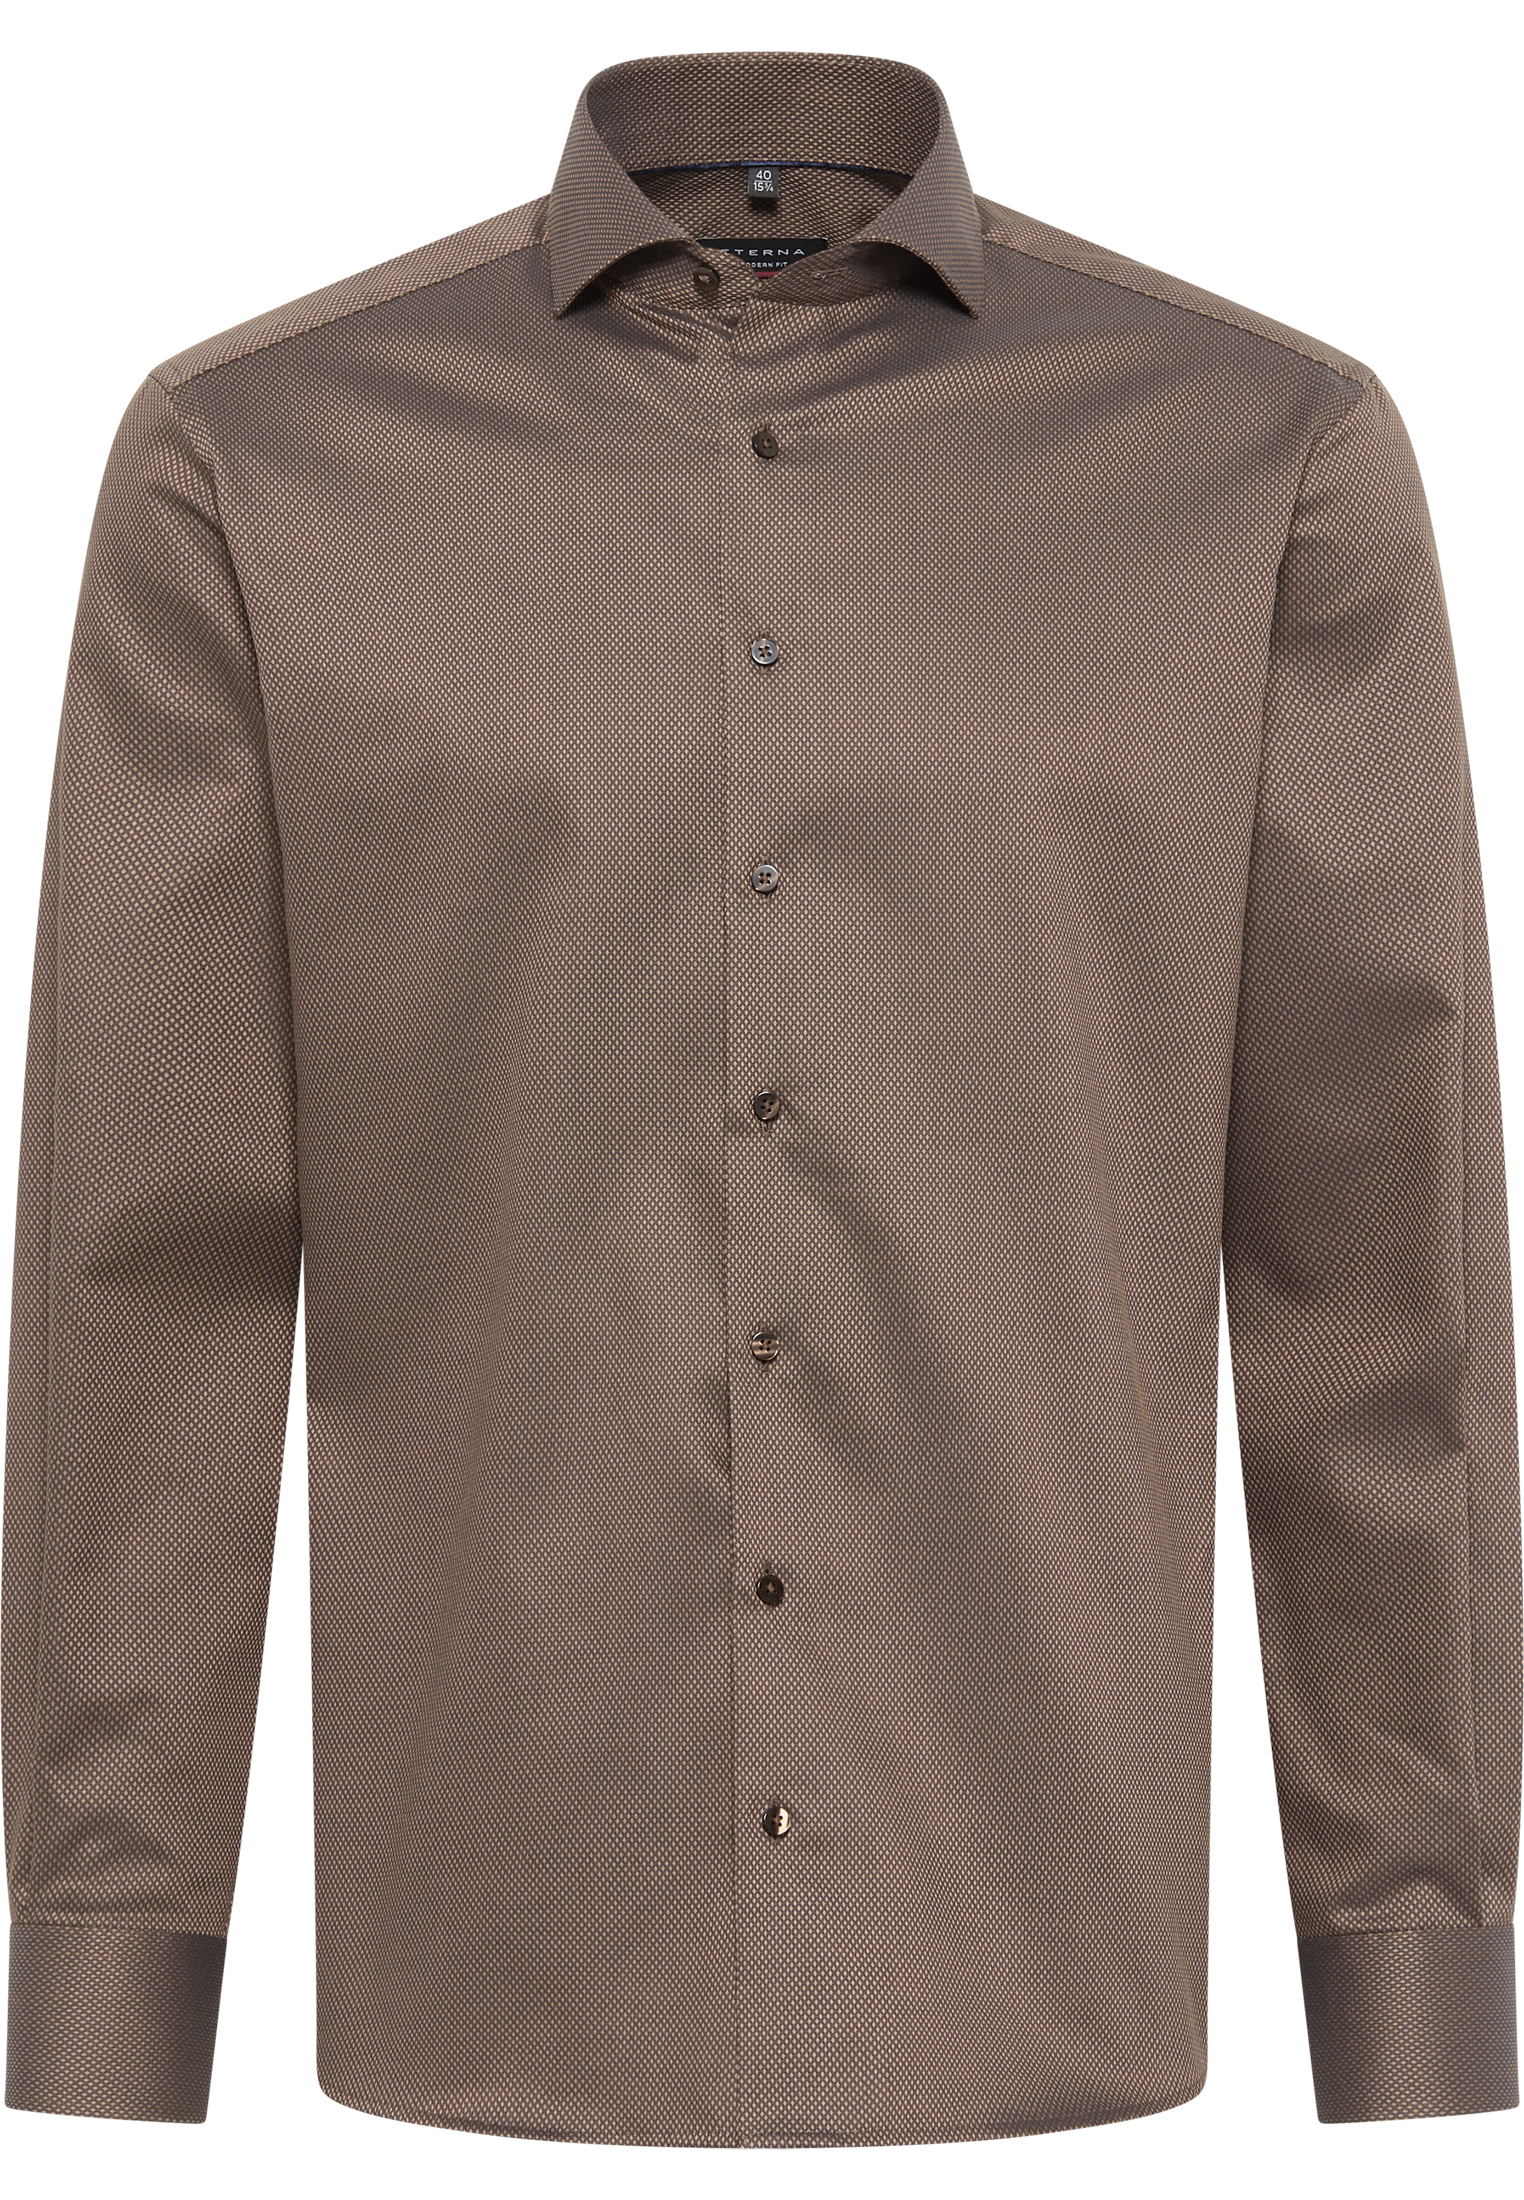 MODERN FIT Shirt in taupe structured